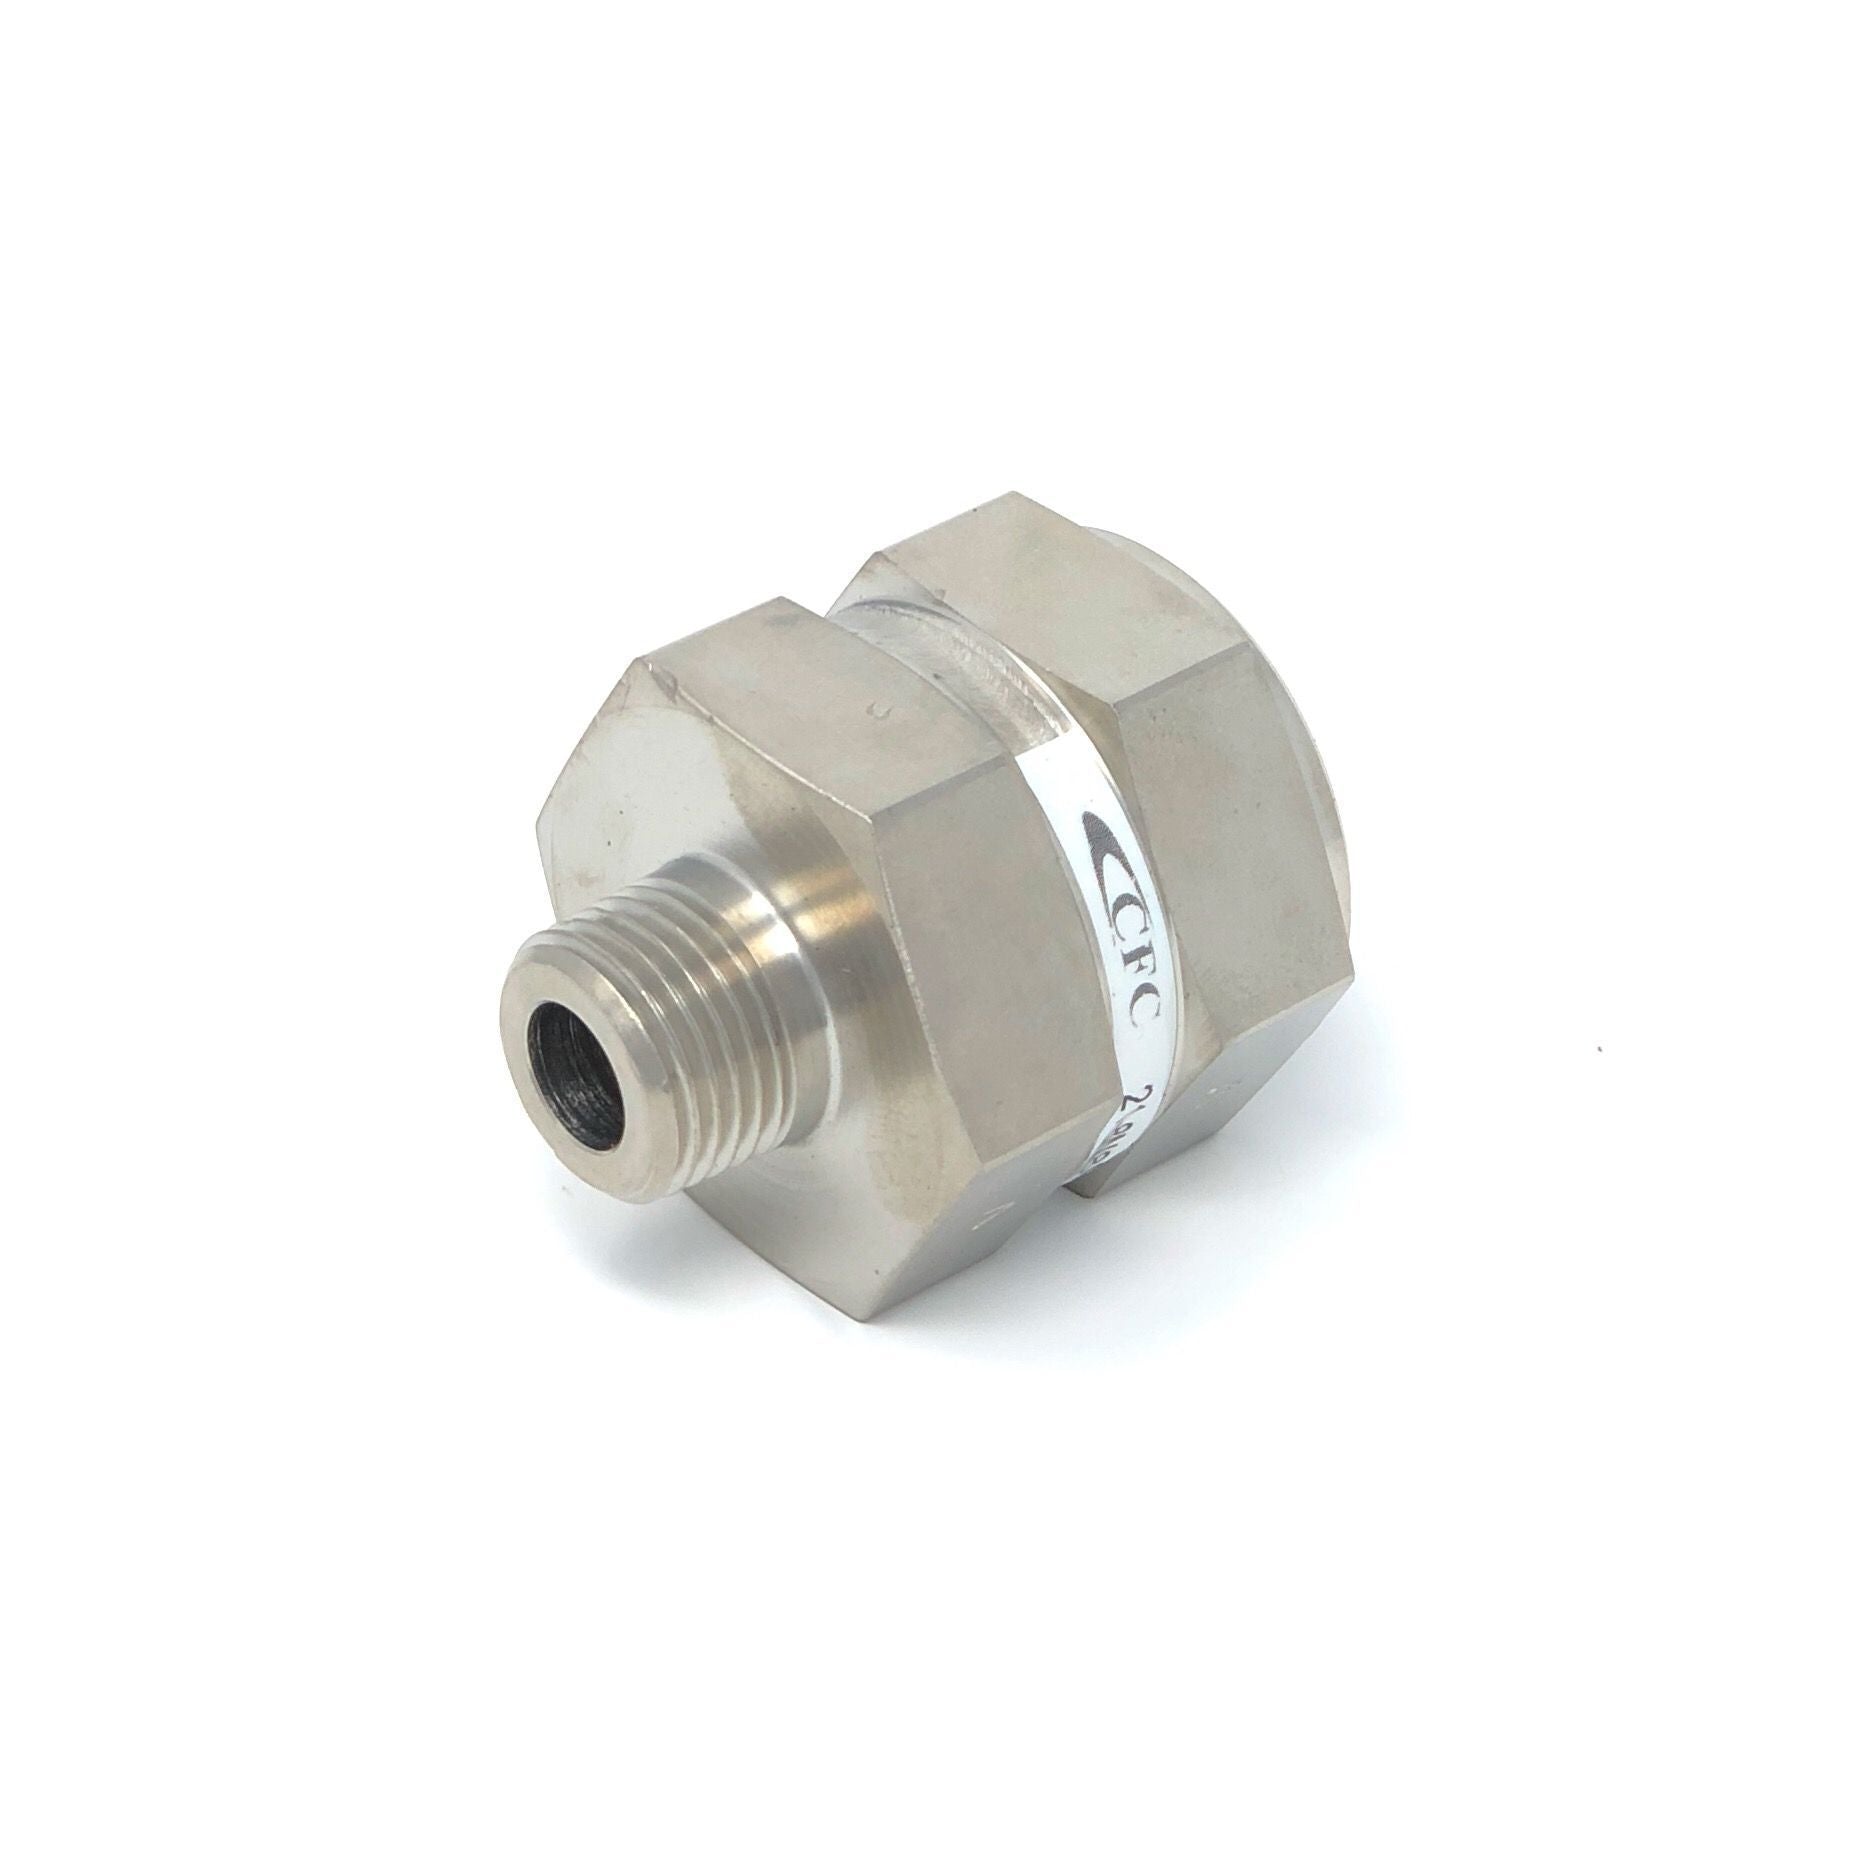 21-6T6T-40S : Chase High Pressure Inline Filter, 6000psi, 3/8" 37 Degree Flare , 40 Micron, No Visual Indicator, No Bypass